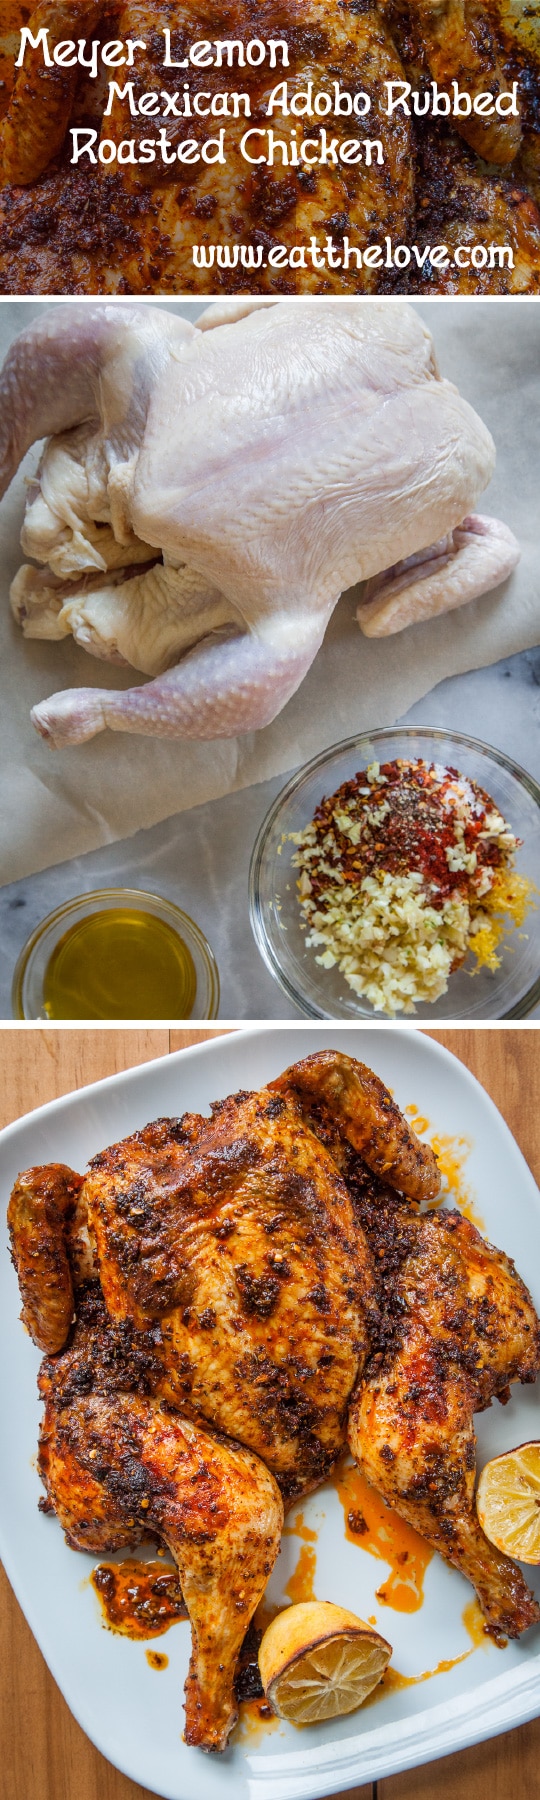 Chicken Rub Recipe for a Meyer Lemon Medican Adobo Rubbed Roasted Chicken. Photo and recipe by Irvin Lin of Eat the Love.